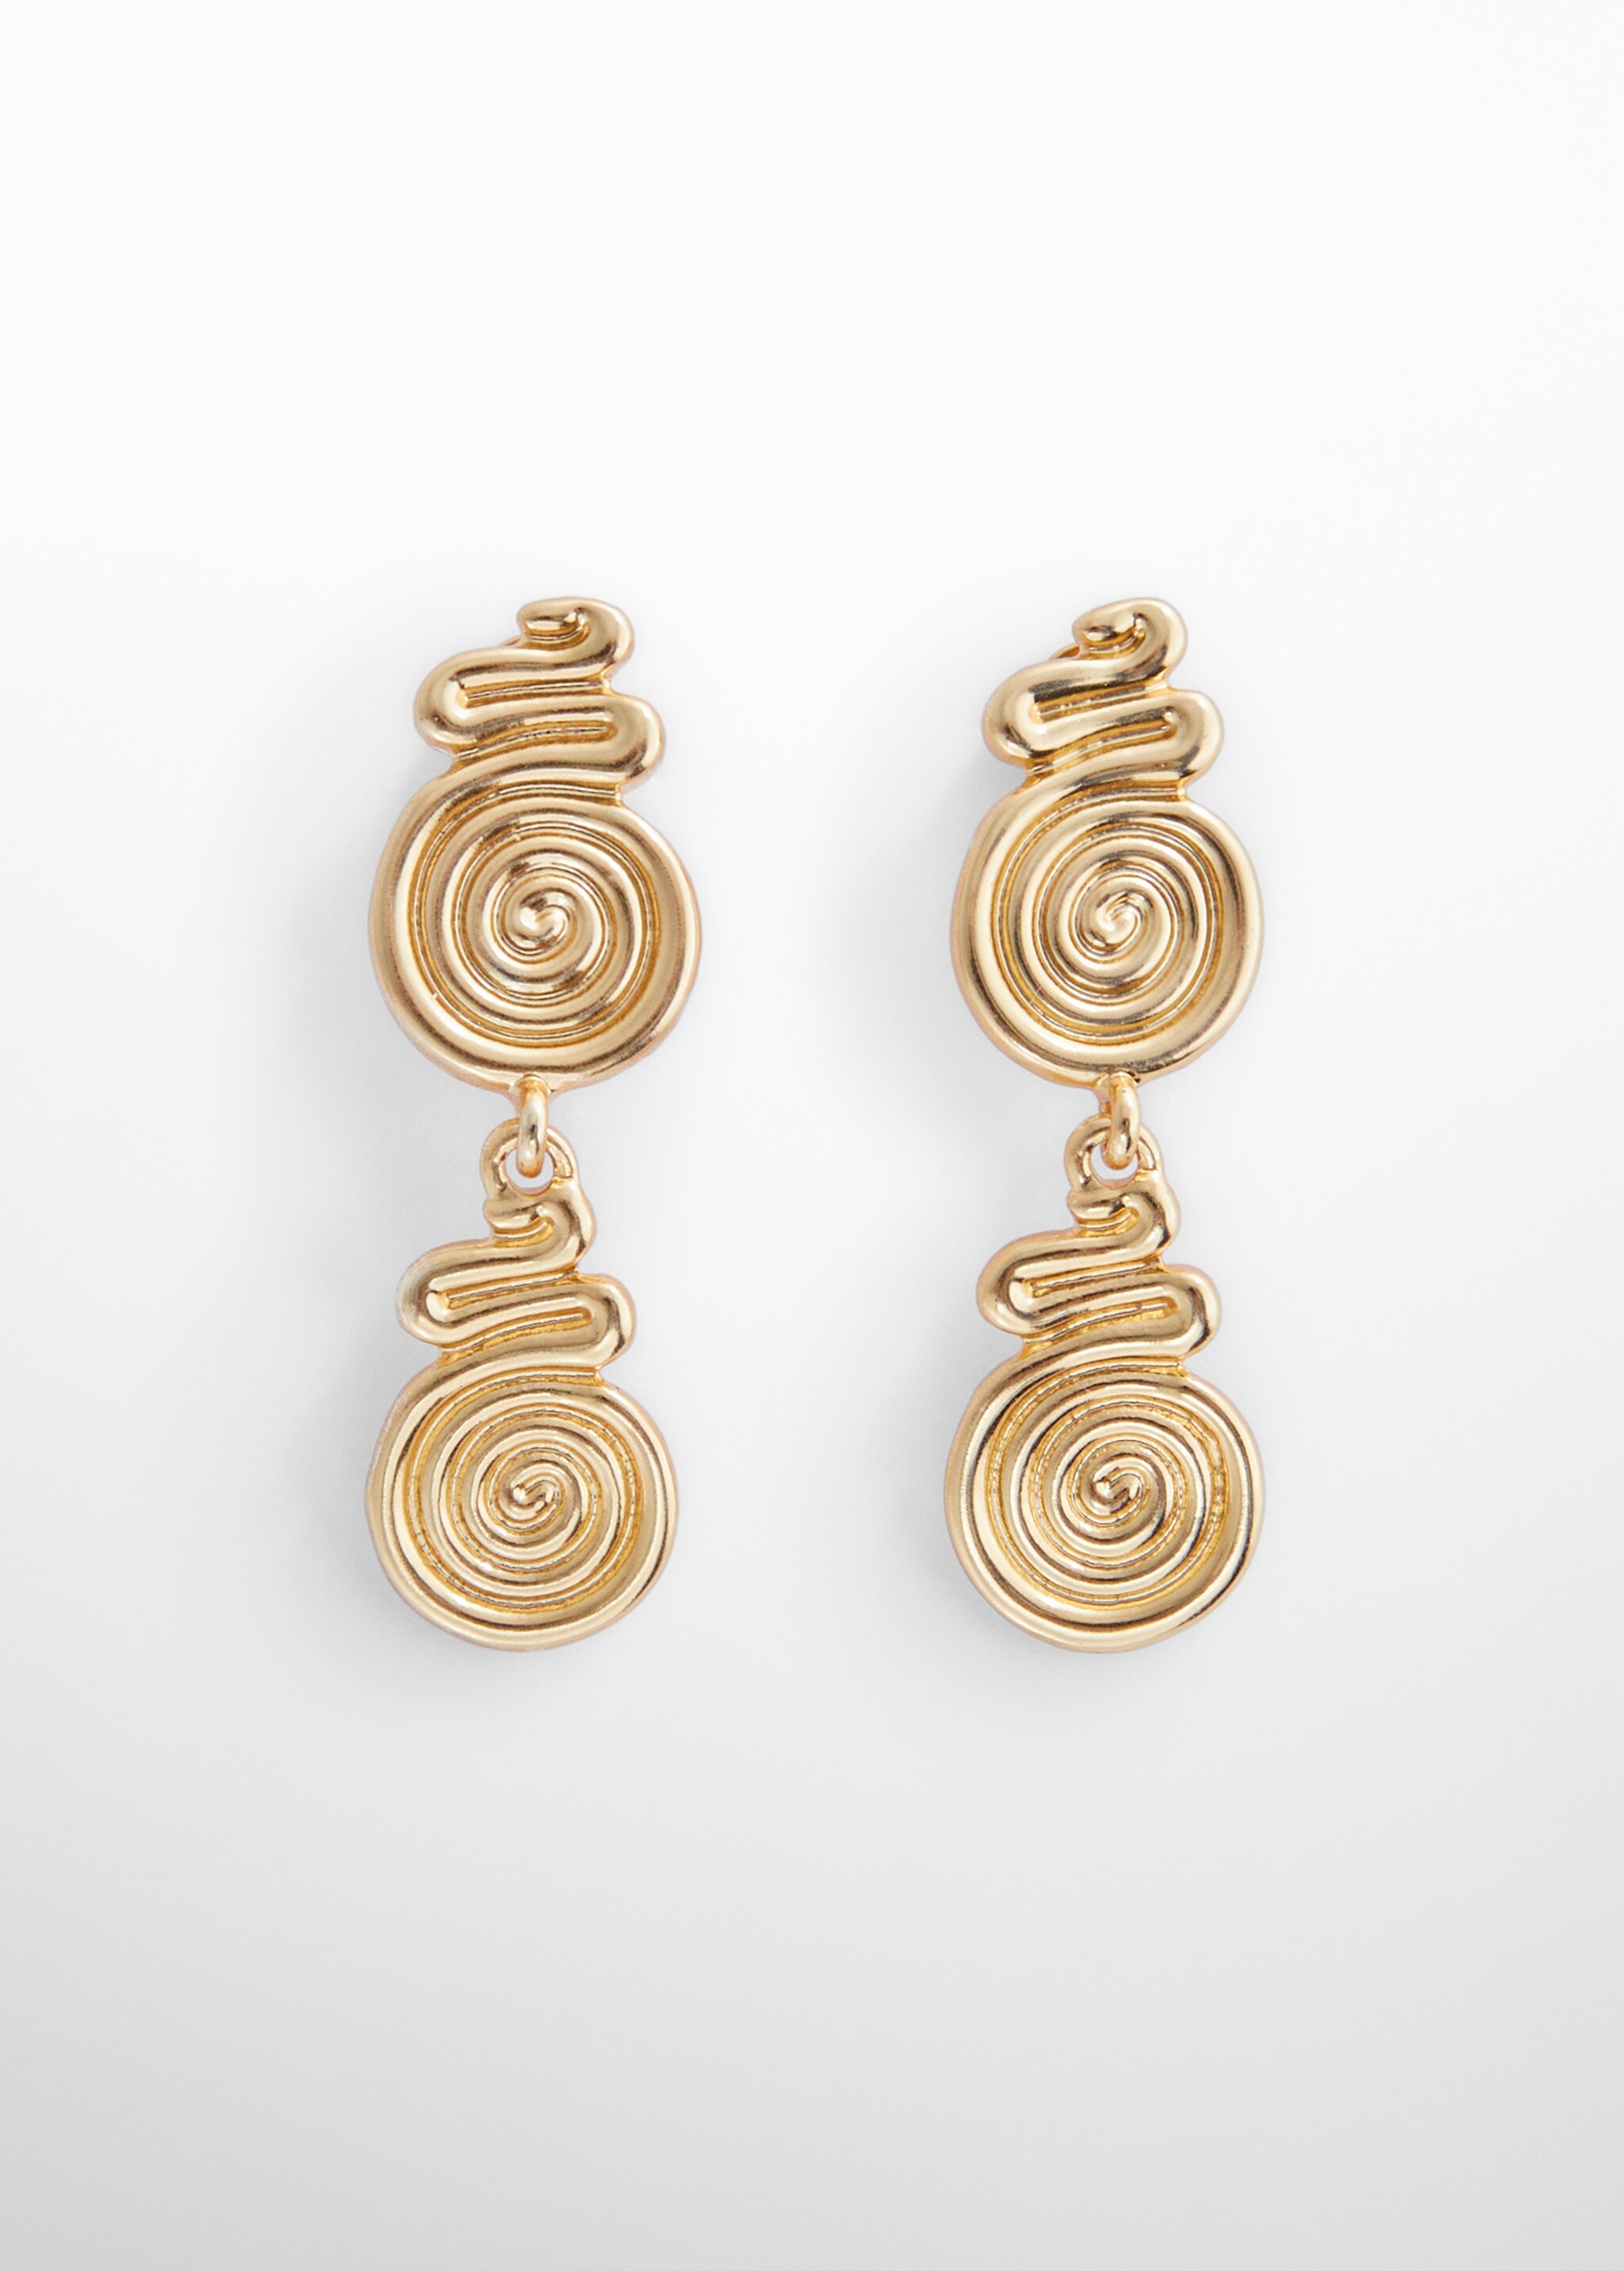 Spiral earrings - Article without model